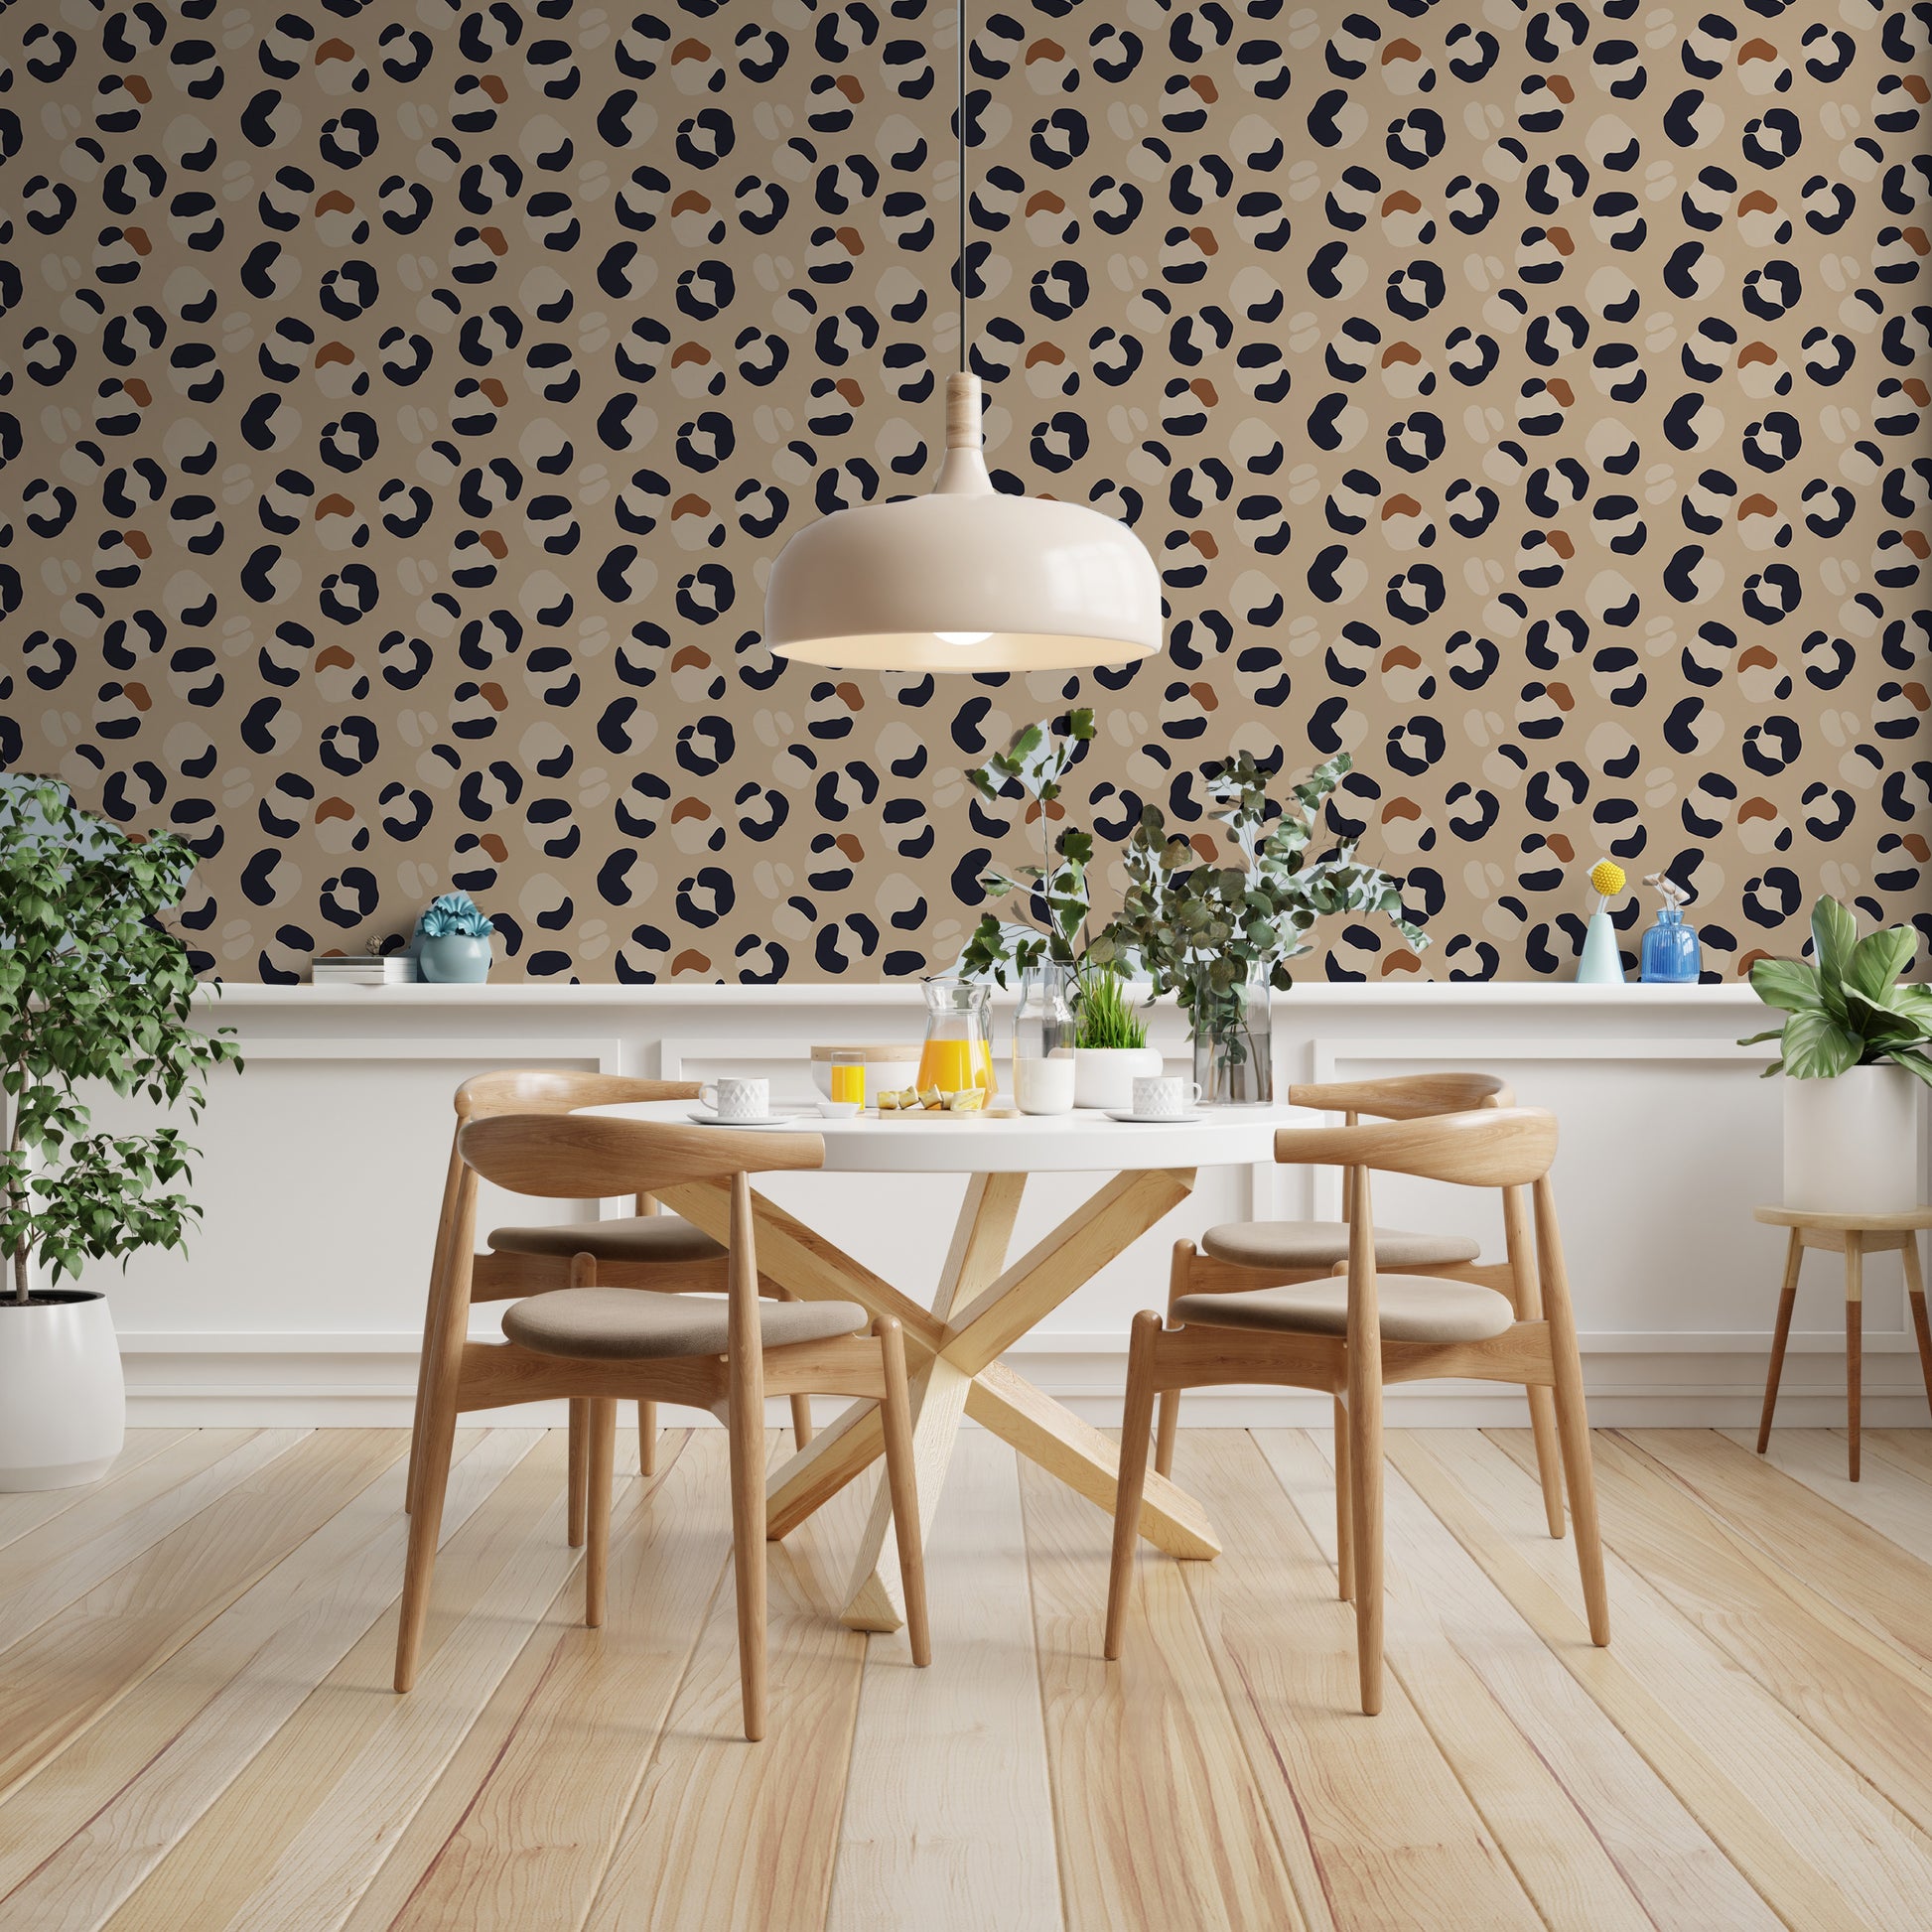 Leopard print wallpaper can go anywhere even a dining room